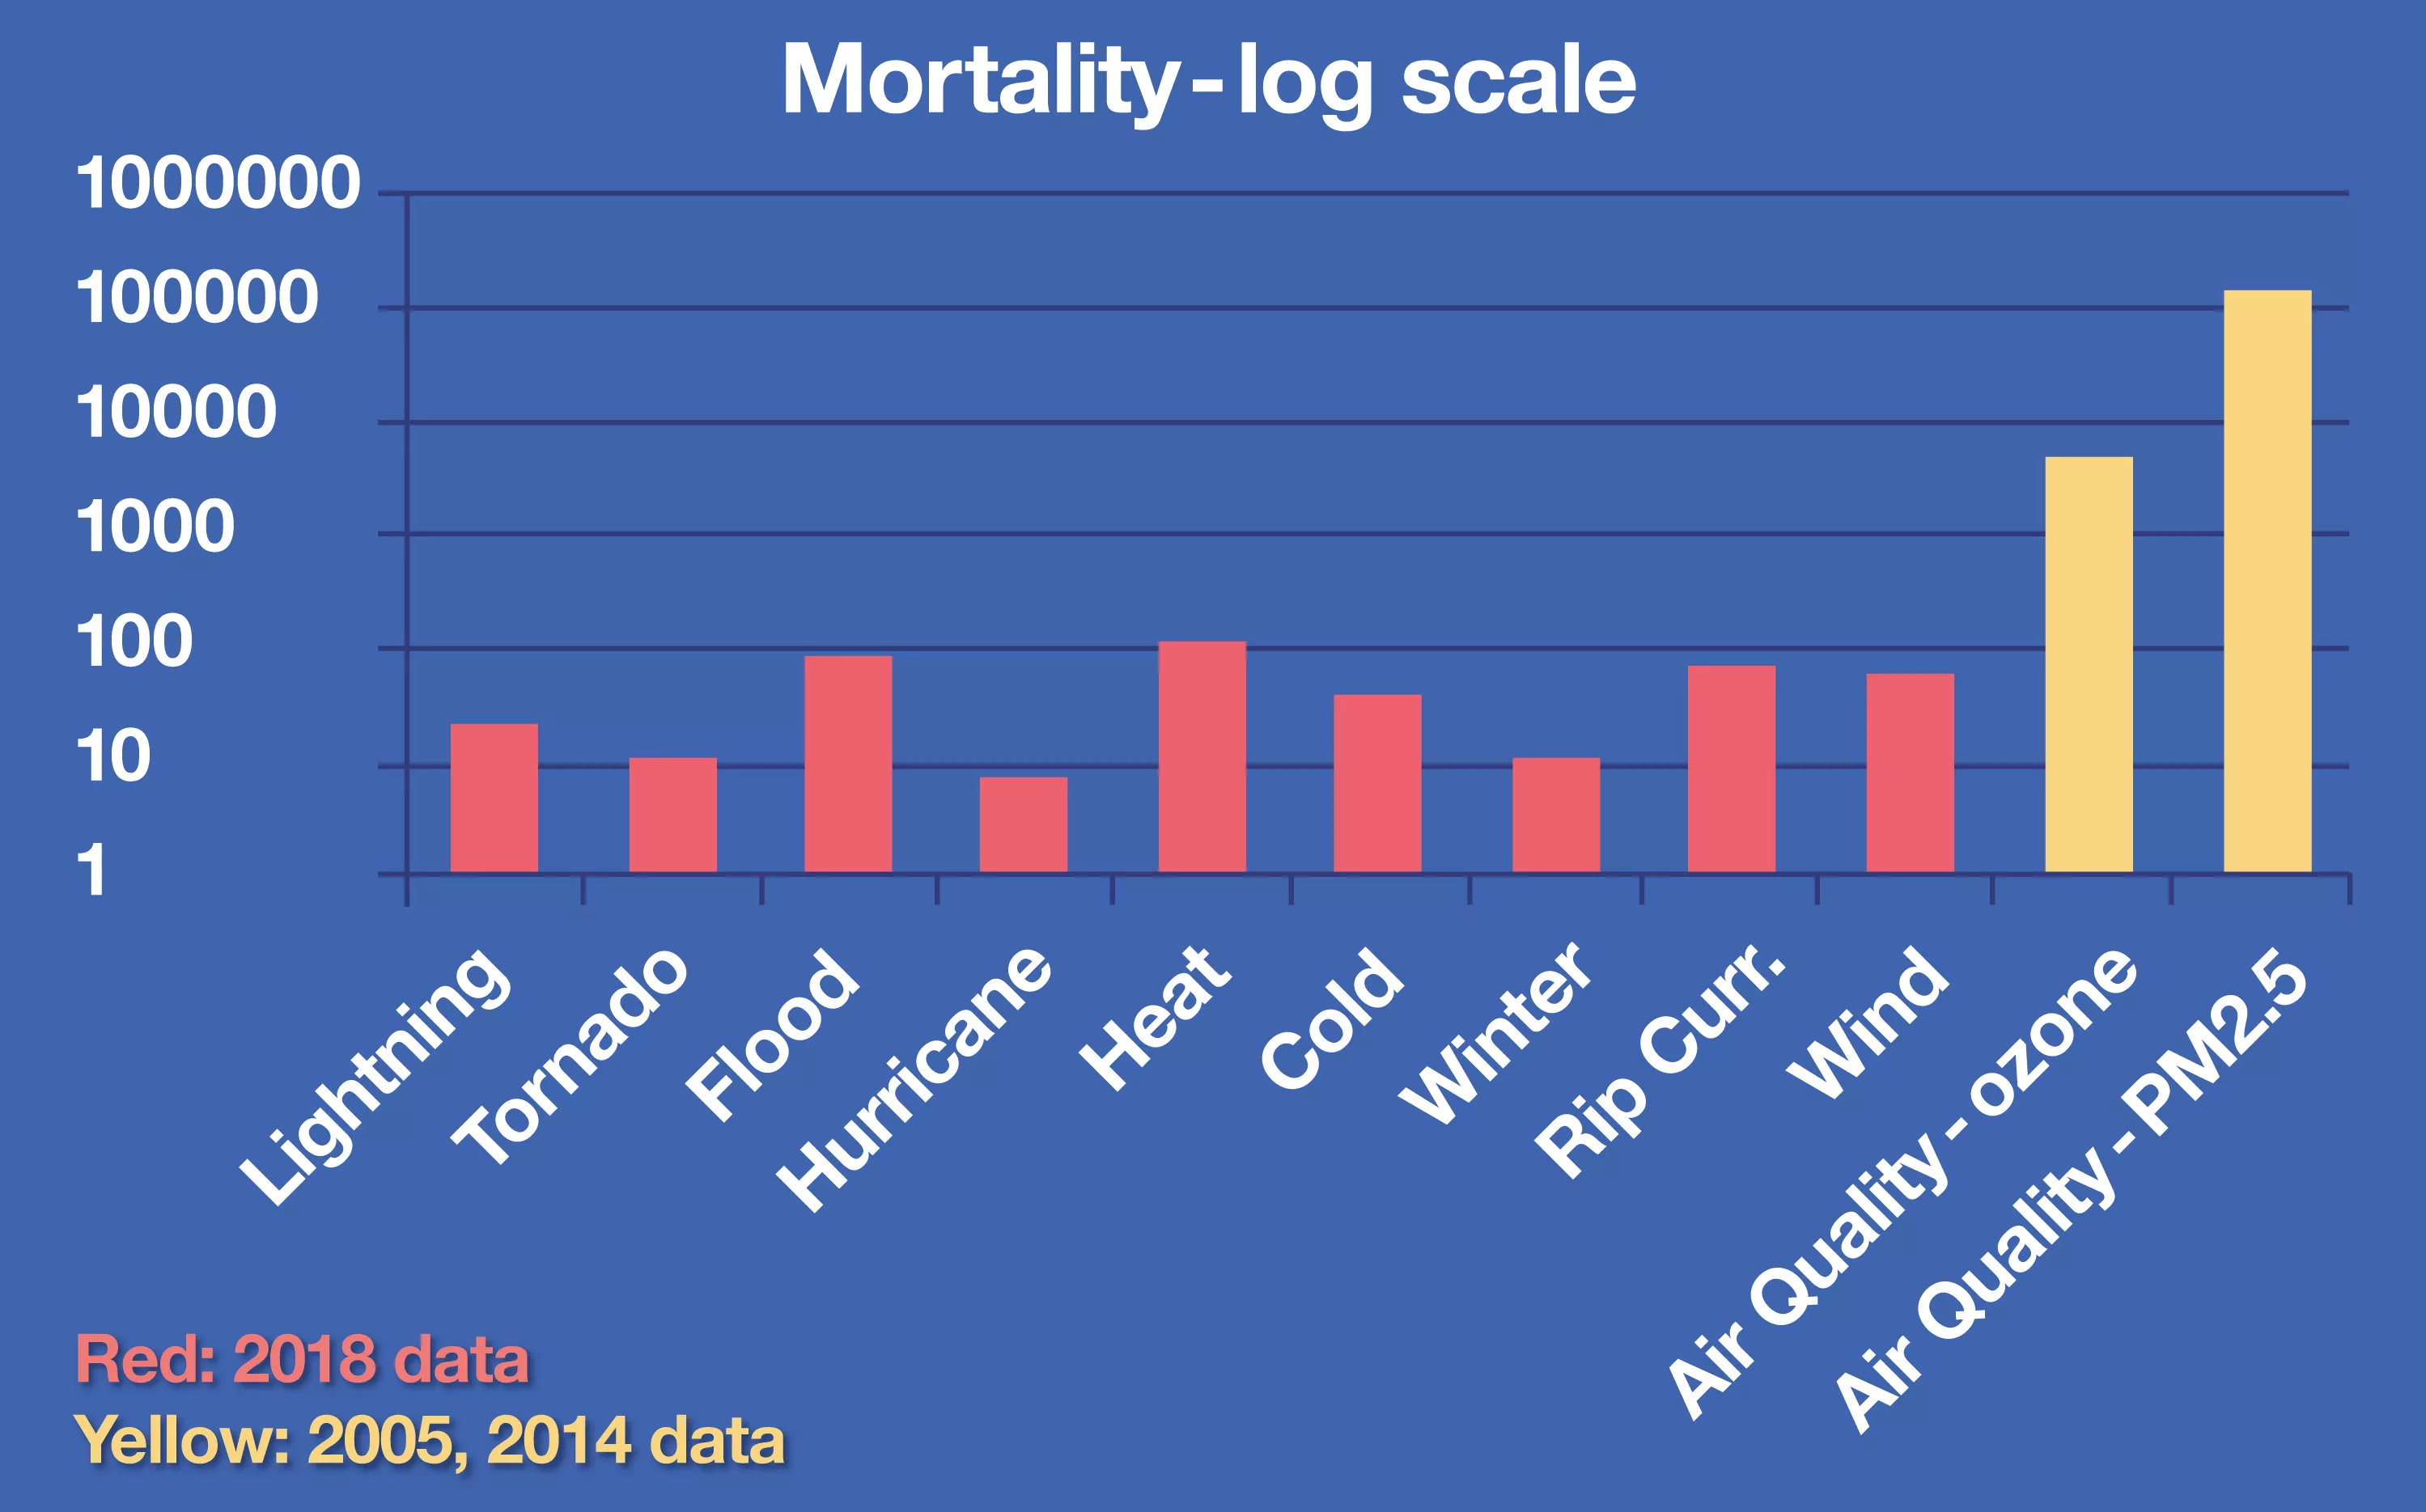 Image of a graph of the mortality log